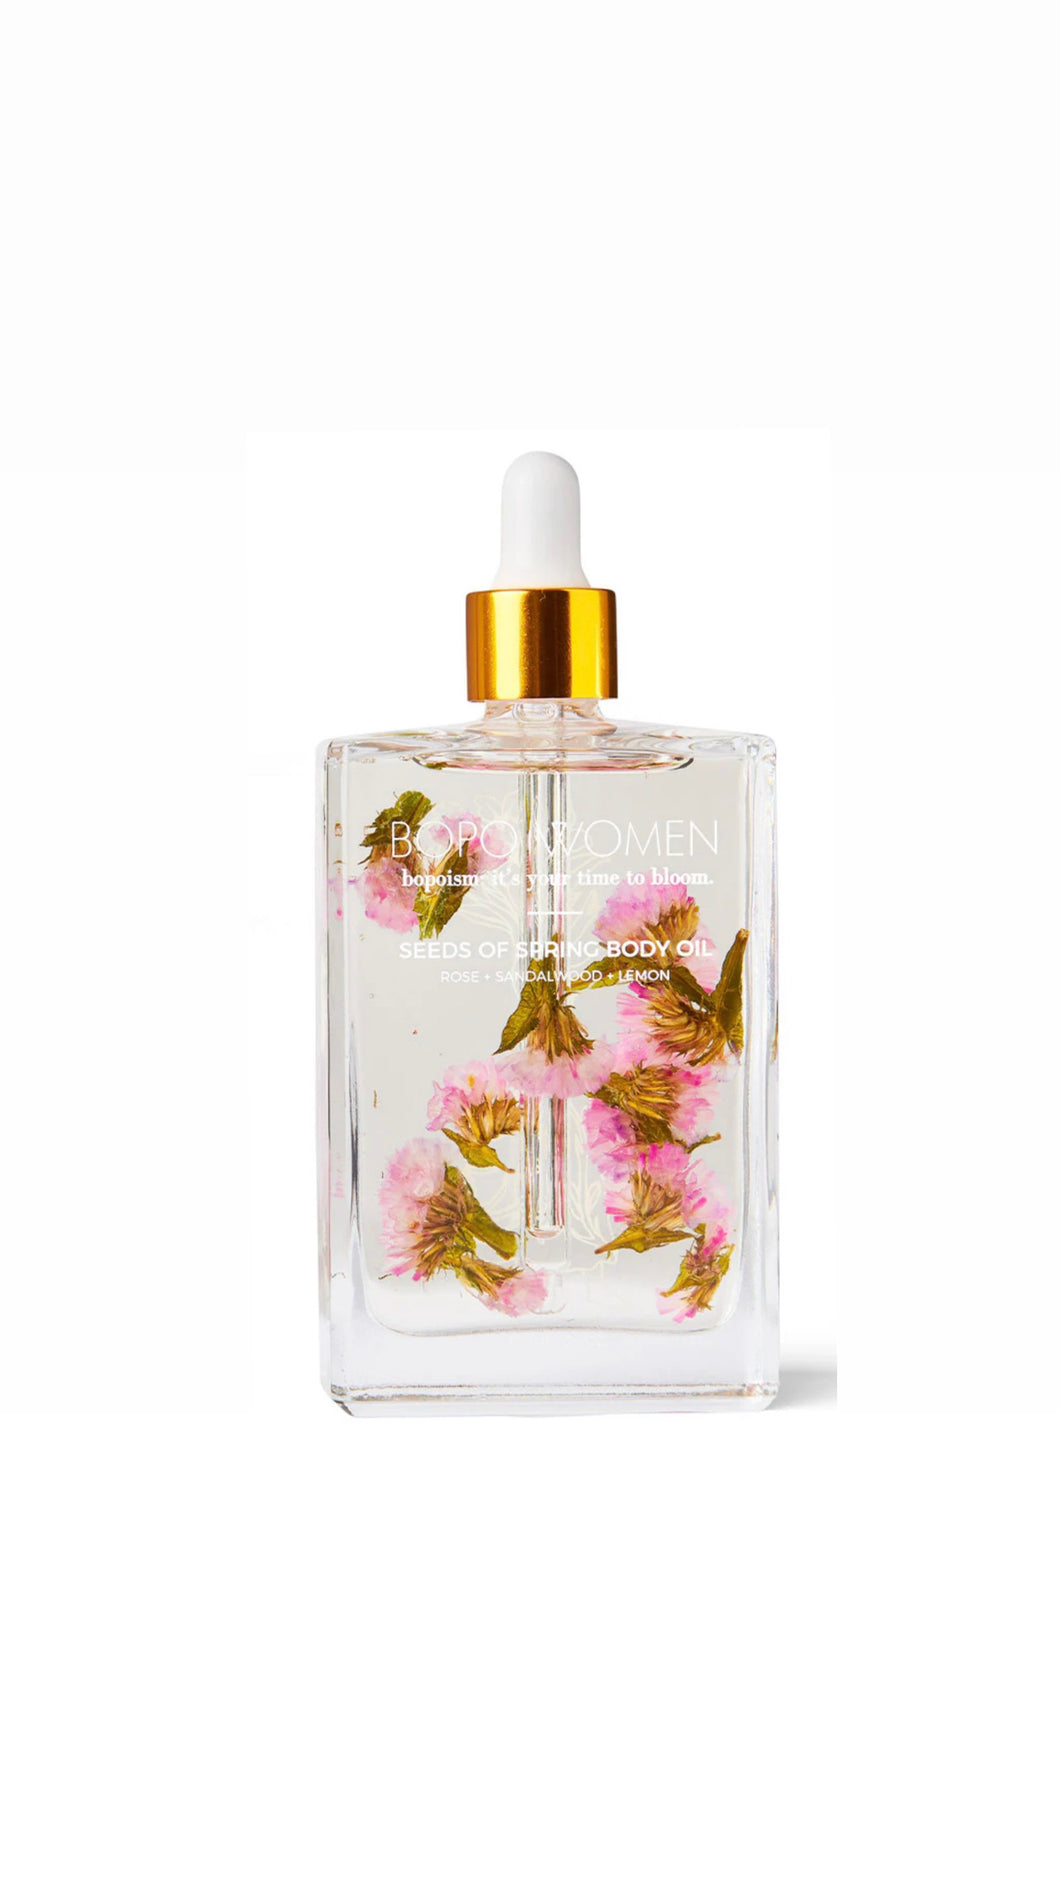 Seeds of Spring Body Oil